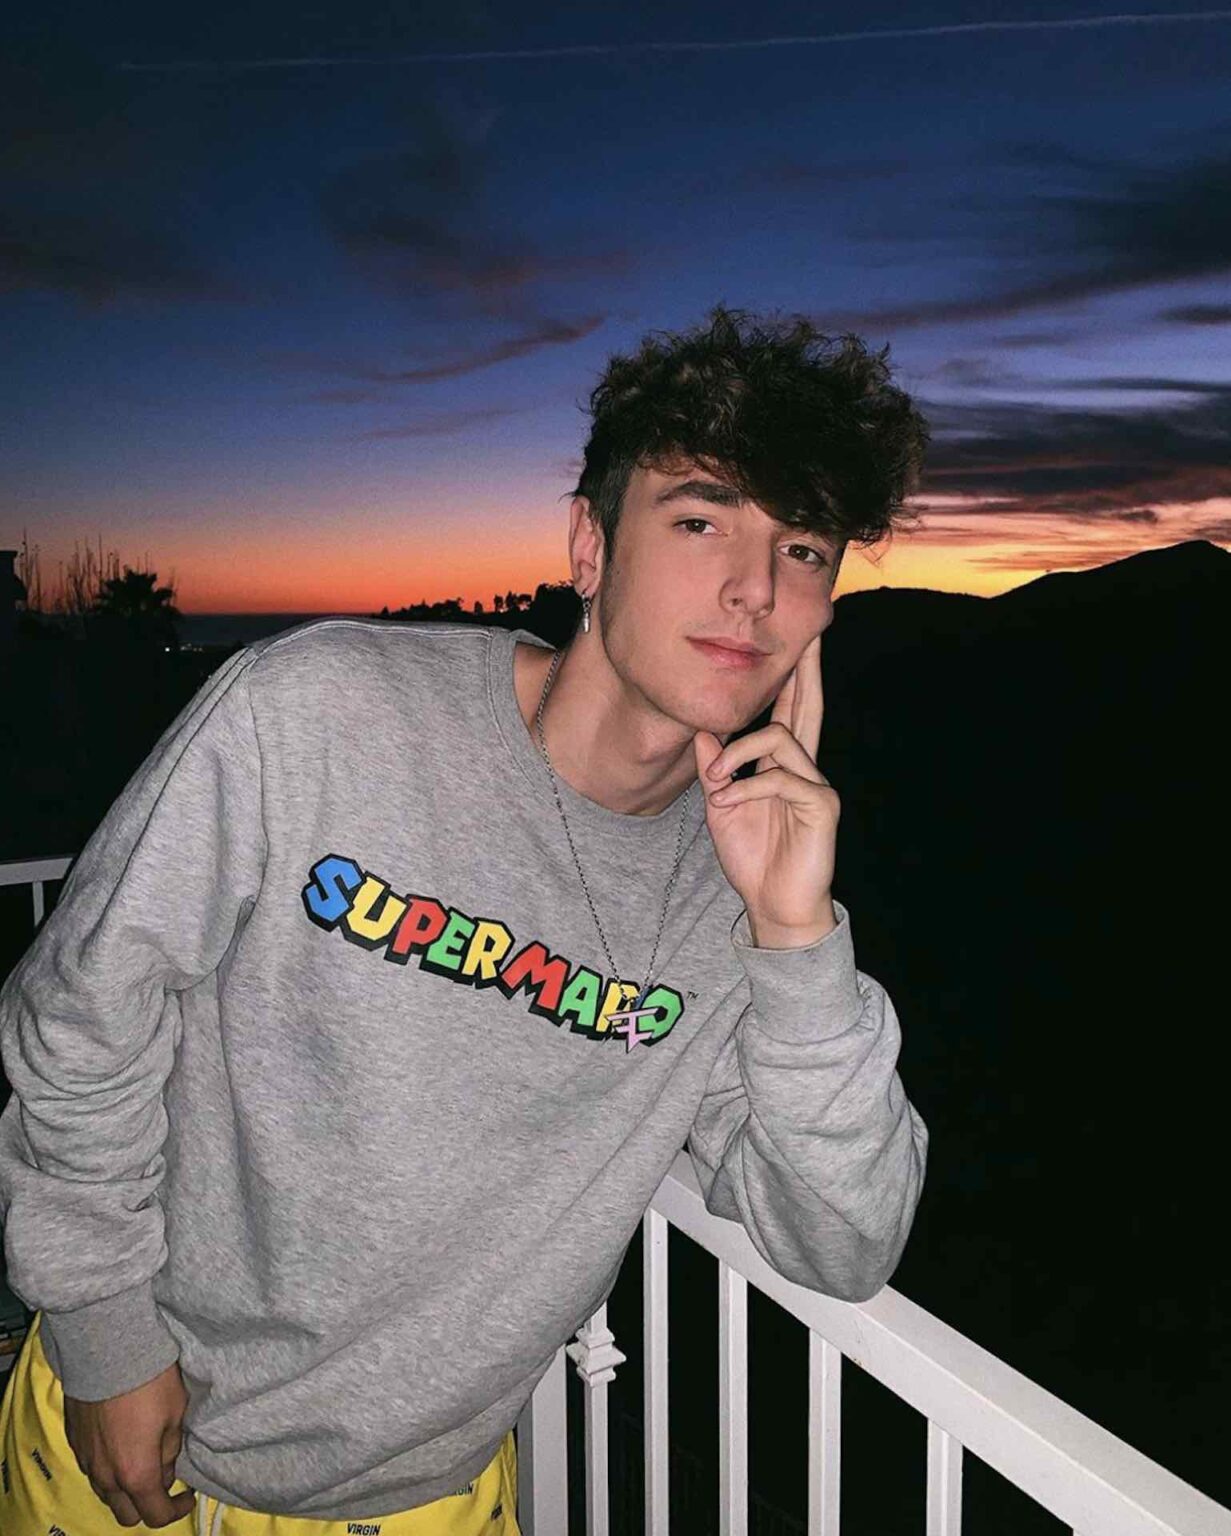 TikTok star Bryce Hall is at war with Los Angeles after his many parties despite COVID-19 lockdown. Here's what we know.